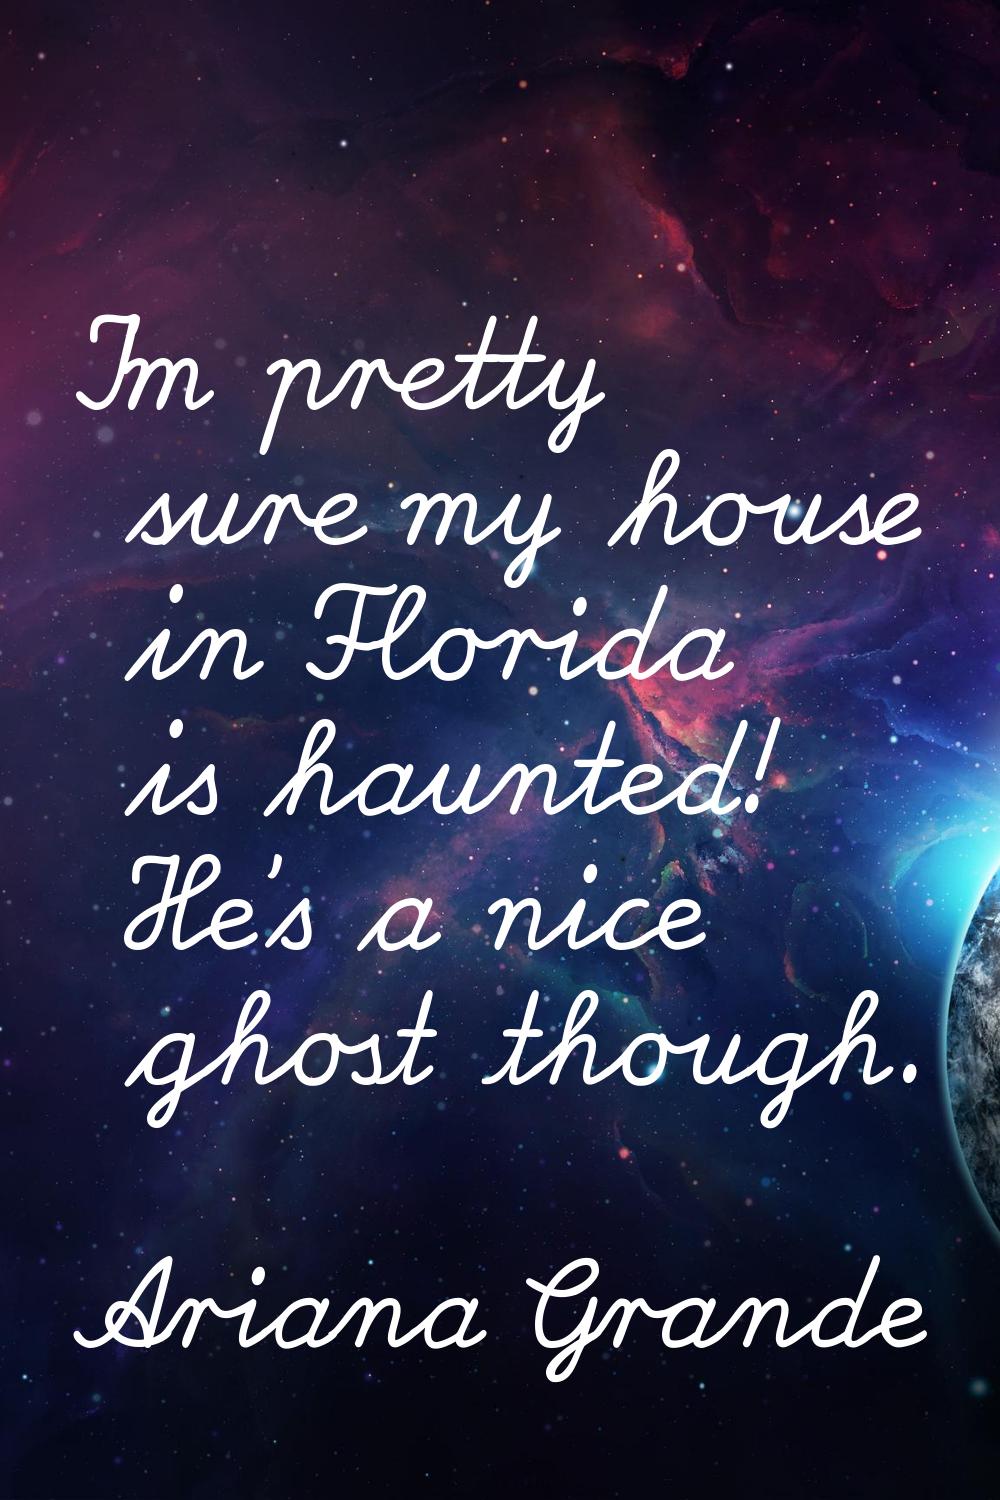 I'm pretty sure my house in Florida is haunted! He's a nice ghost though.